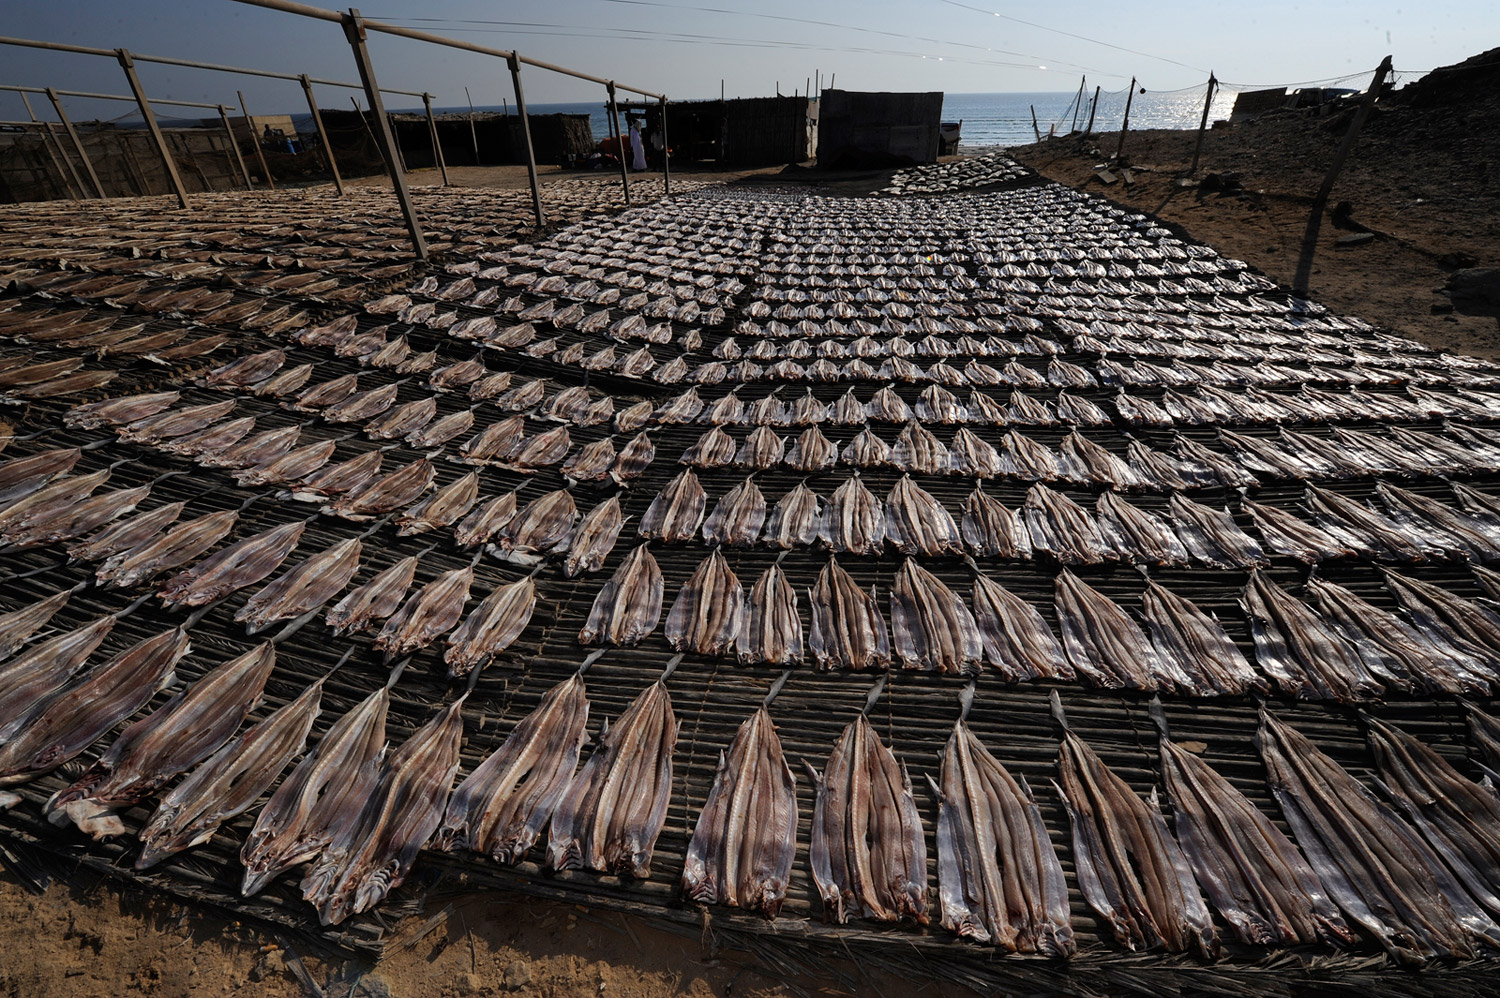 Shark meat laid out to dry in the hot desert sun at Al Khaluf, Oman.